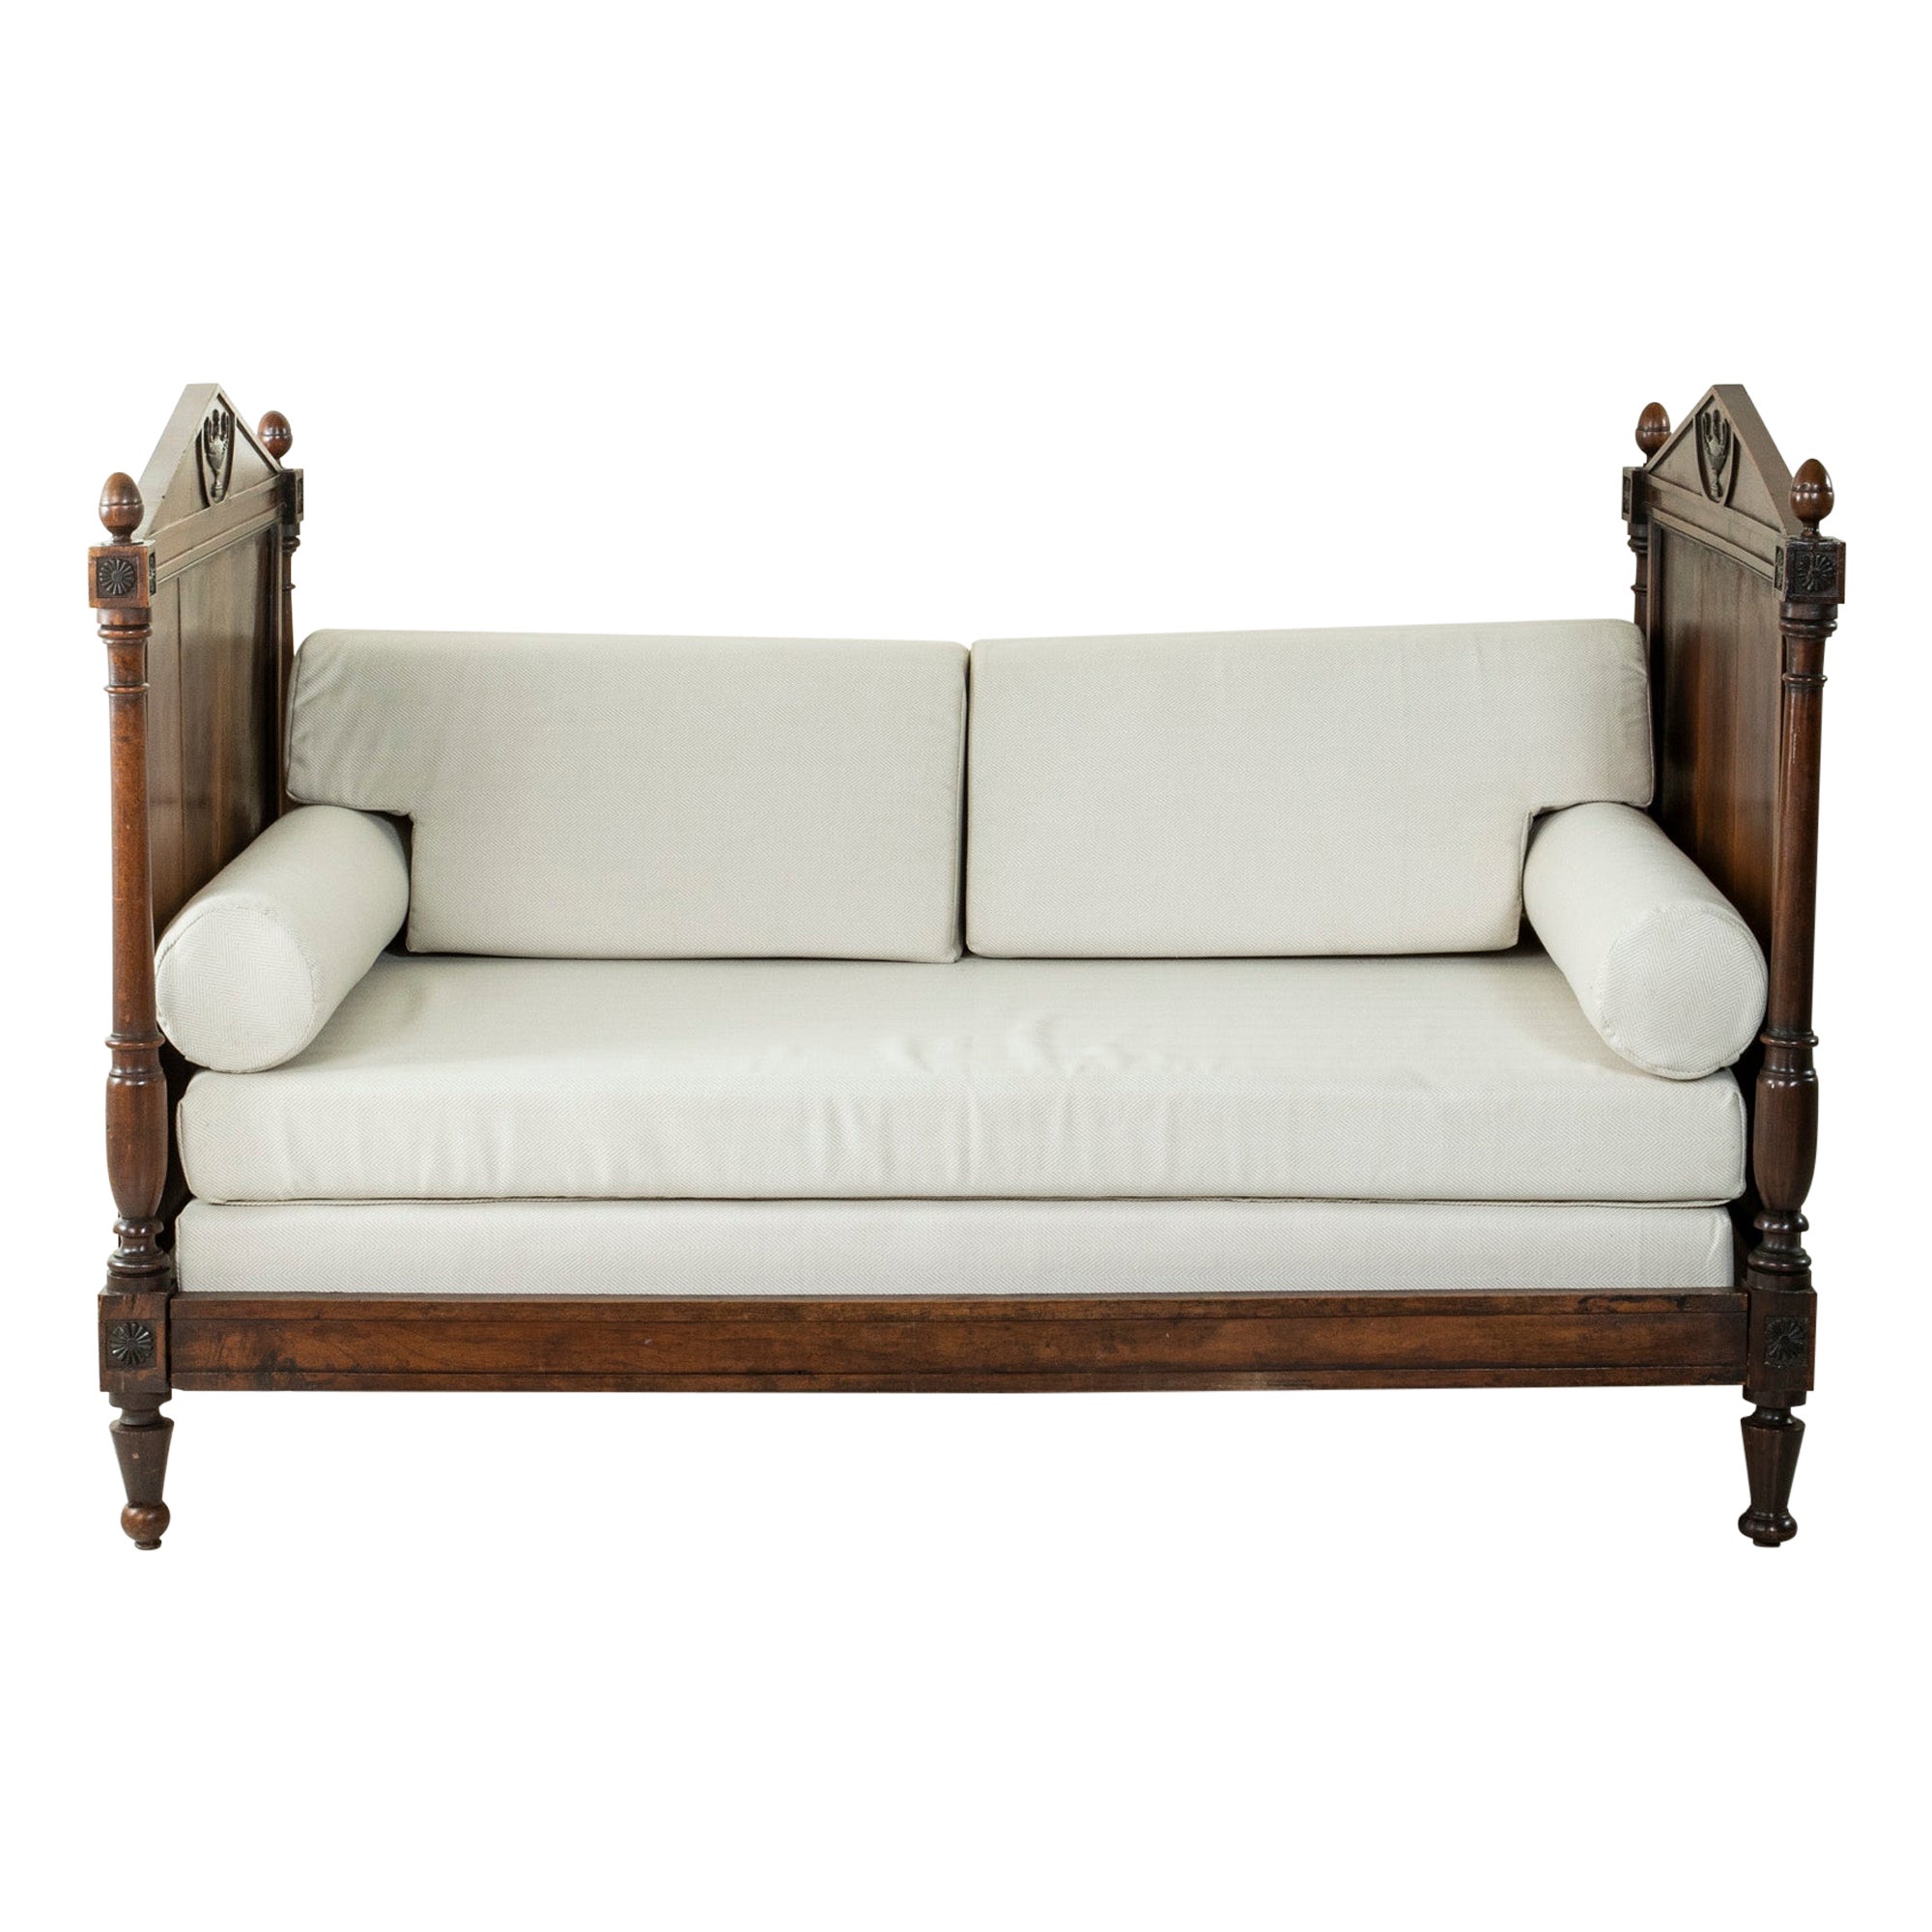 Late 18th Century French Directoire Period Hand Carved Walnut Daybed For Sale